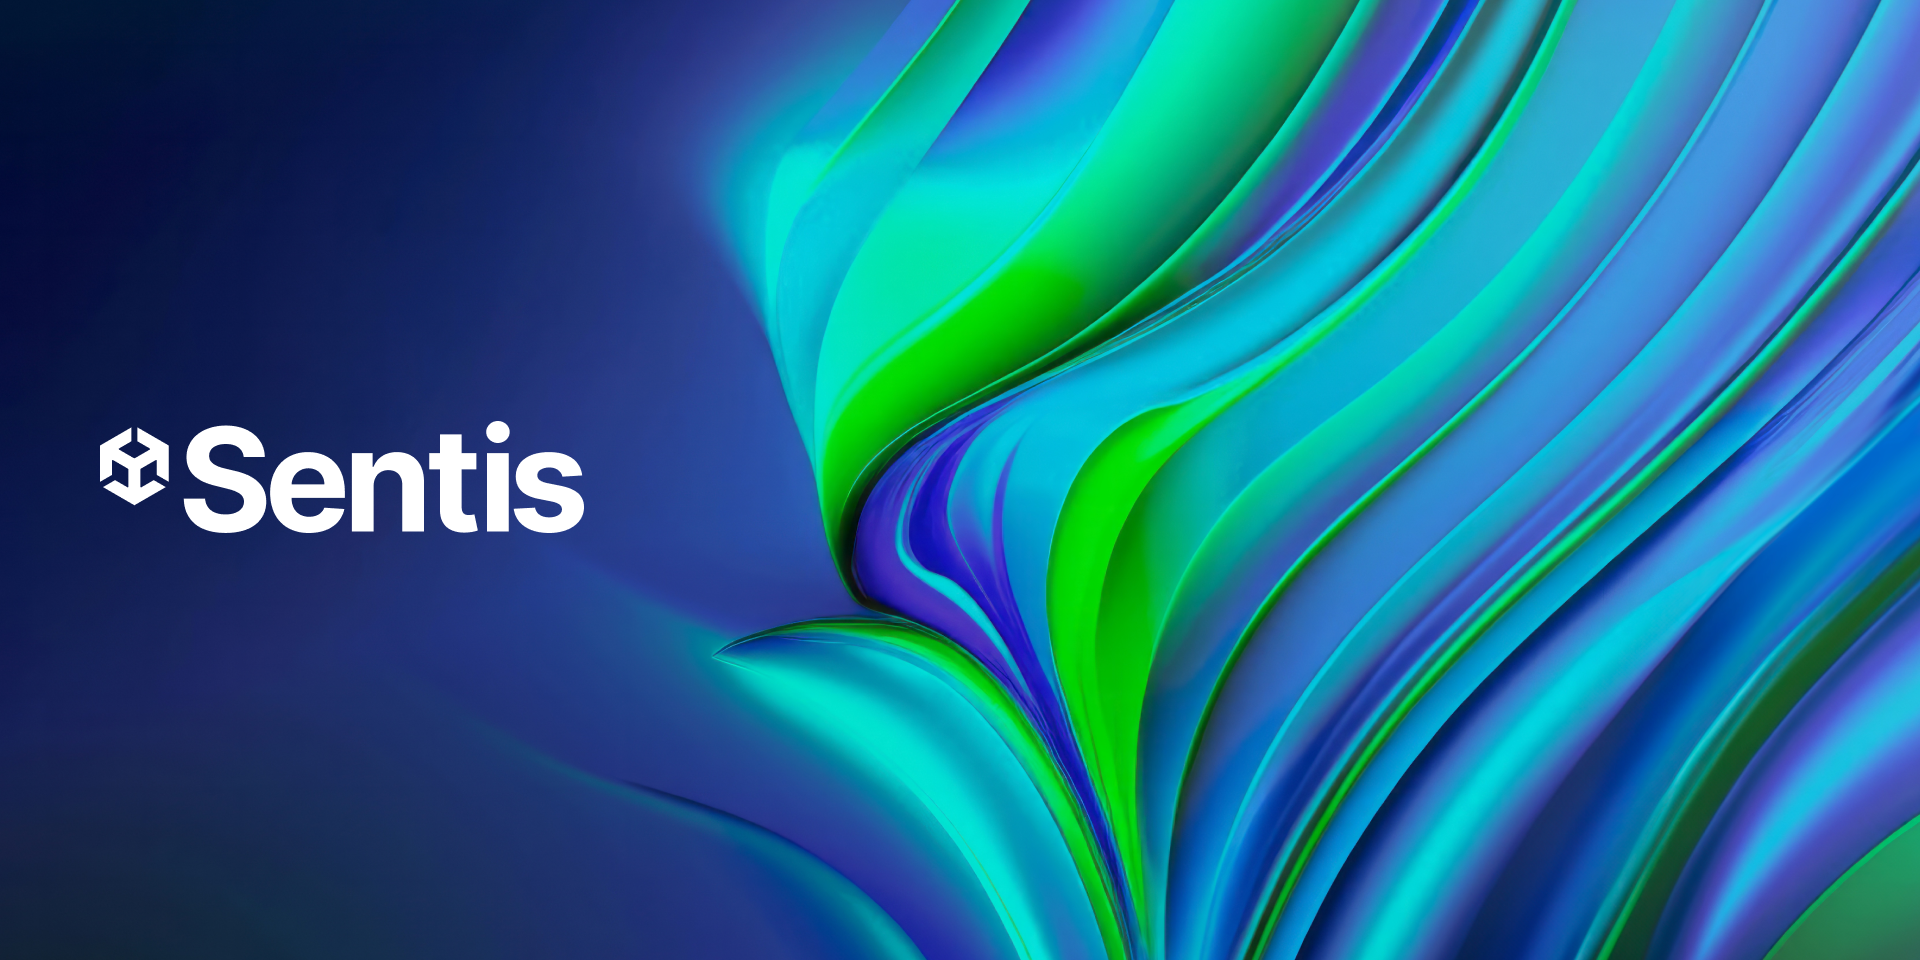 Representative image for Unity Sentis, showing a blue, green, and purple swirl that appears silky and is fading to black along the left side